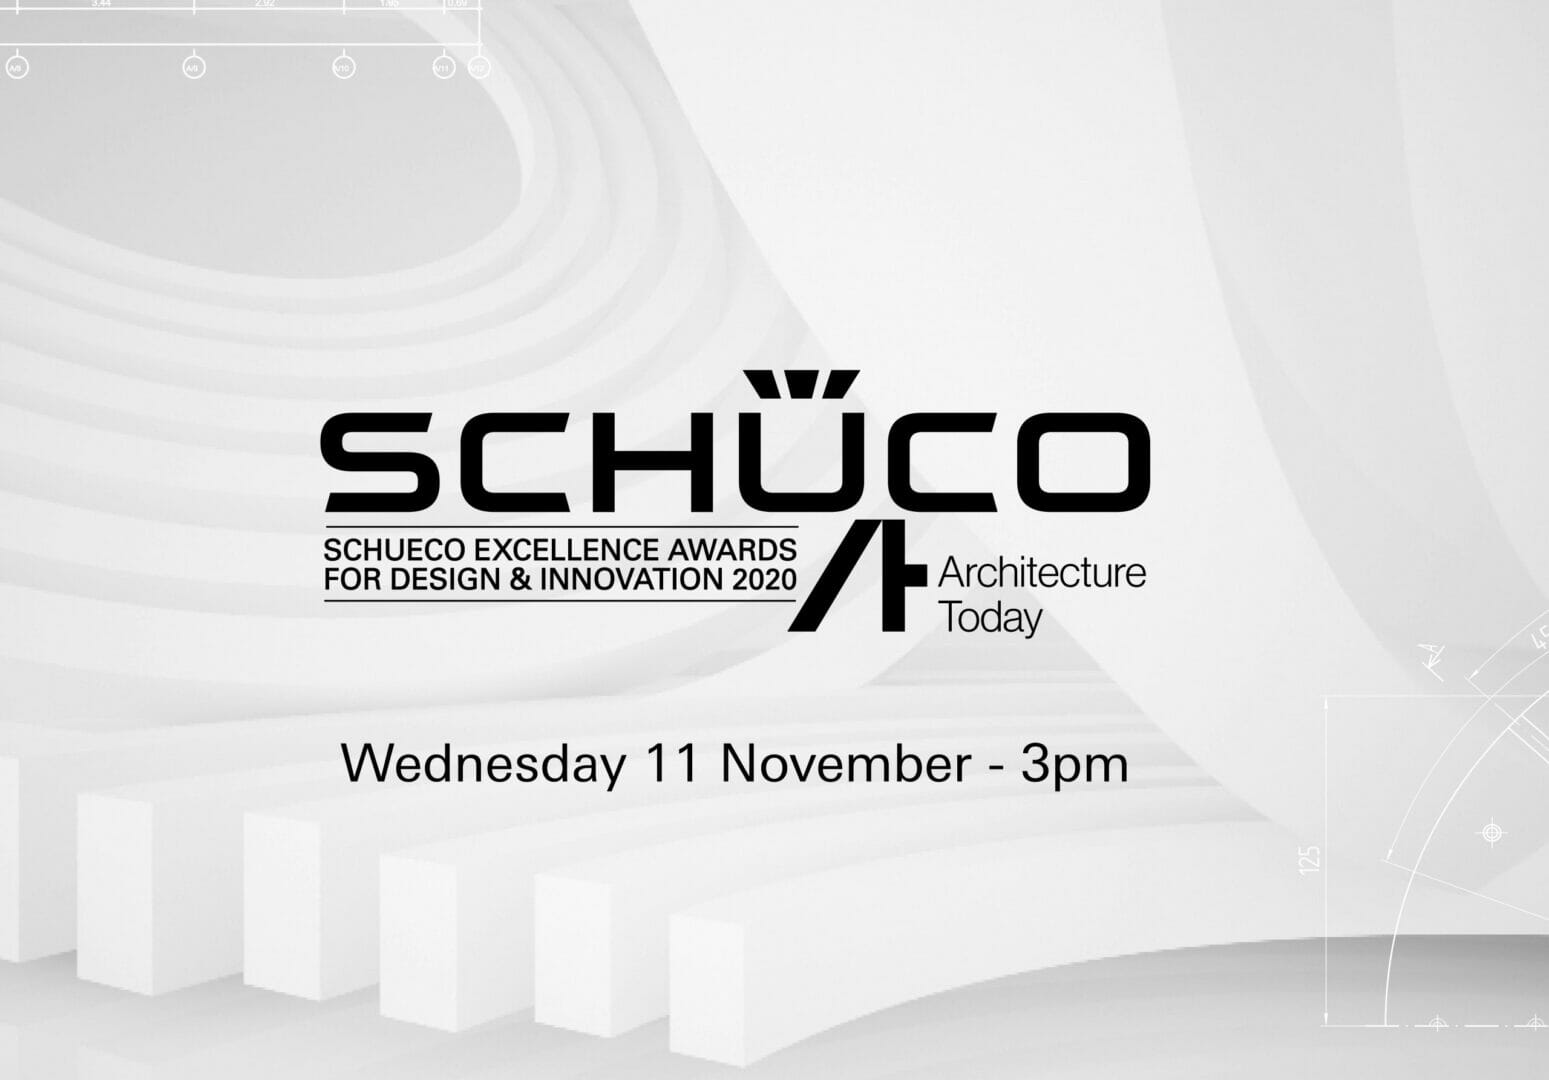 The 7th Schüco Excellence Awards are right around the corner